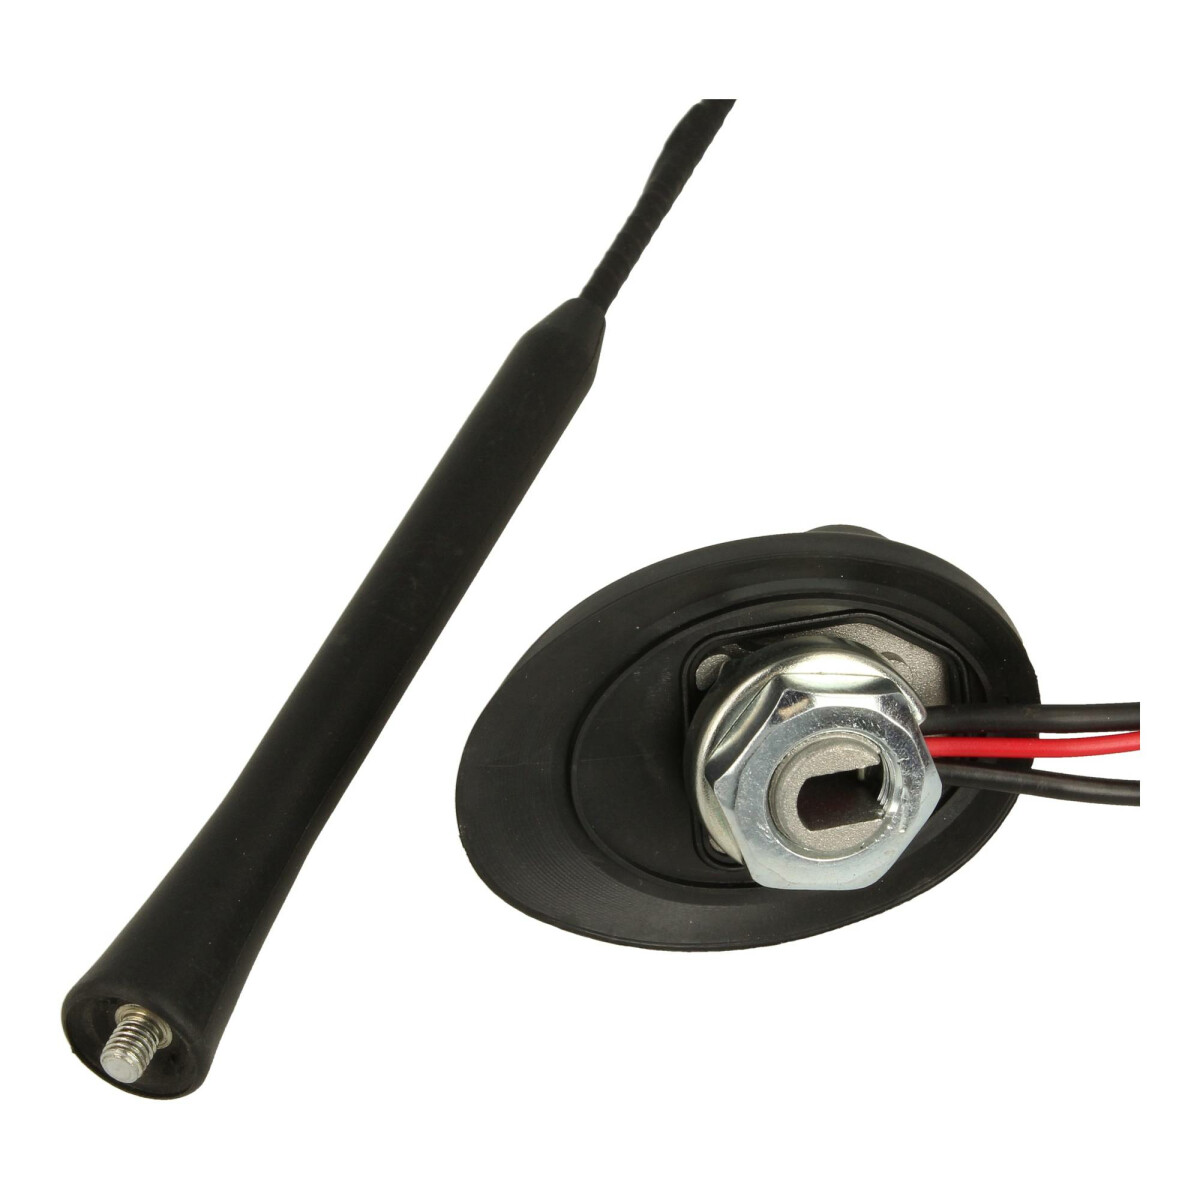 Audioproject A288 Autoantenne 28cm Fuß 5m Strom Kabel AM FM UKW